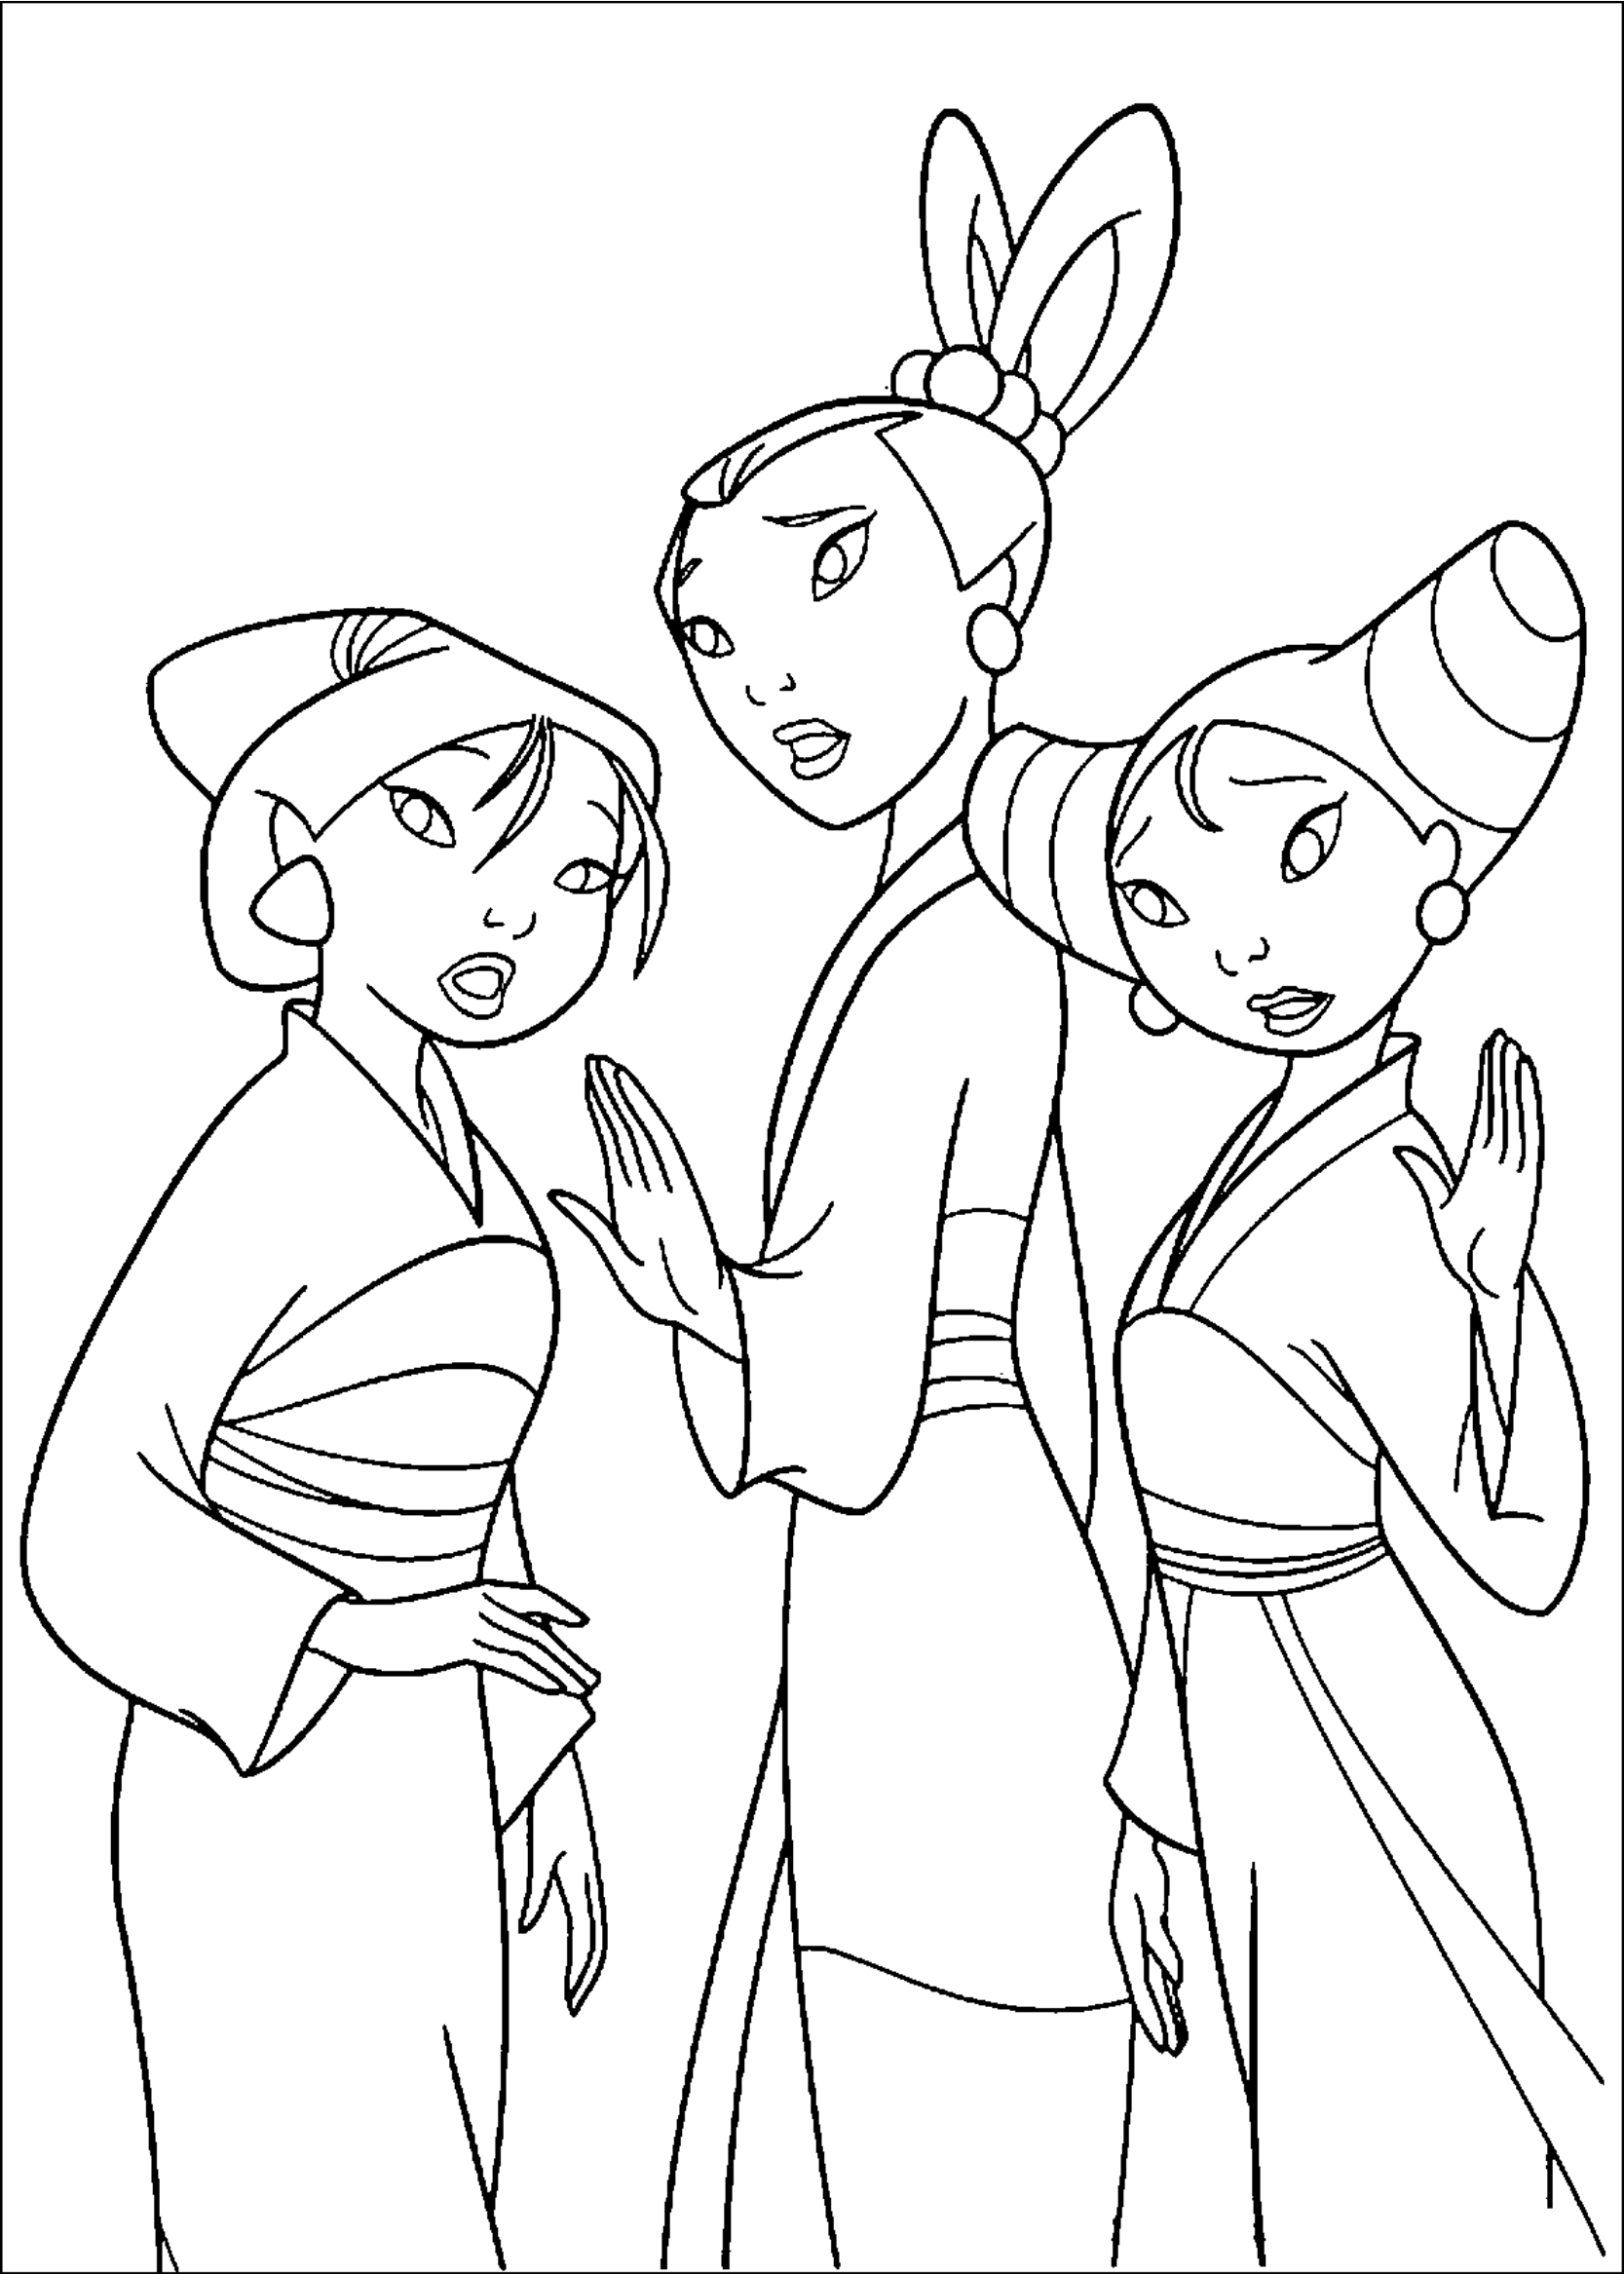 mulan-coloring-pages-to-download-and-print-for-free